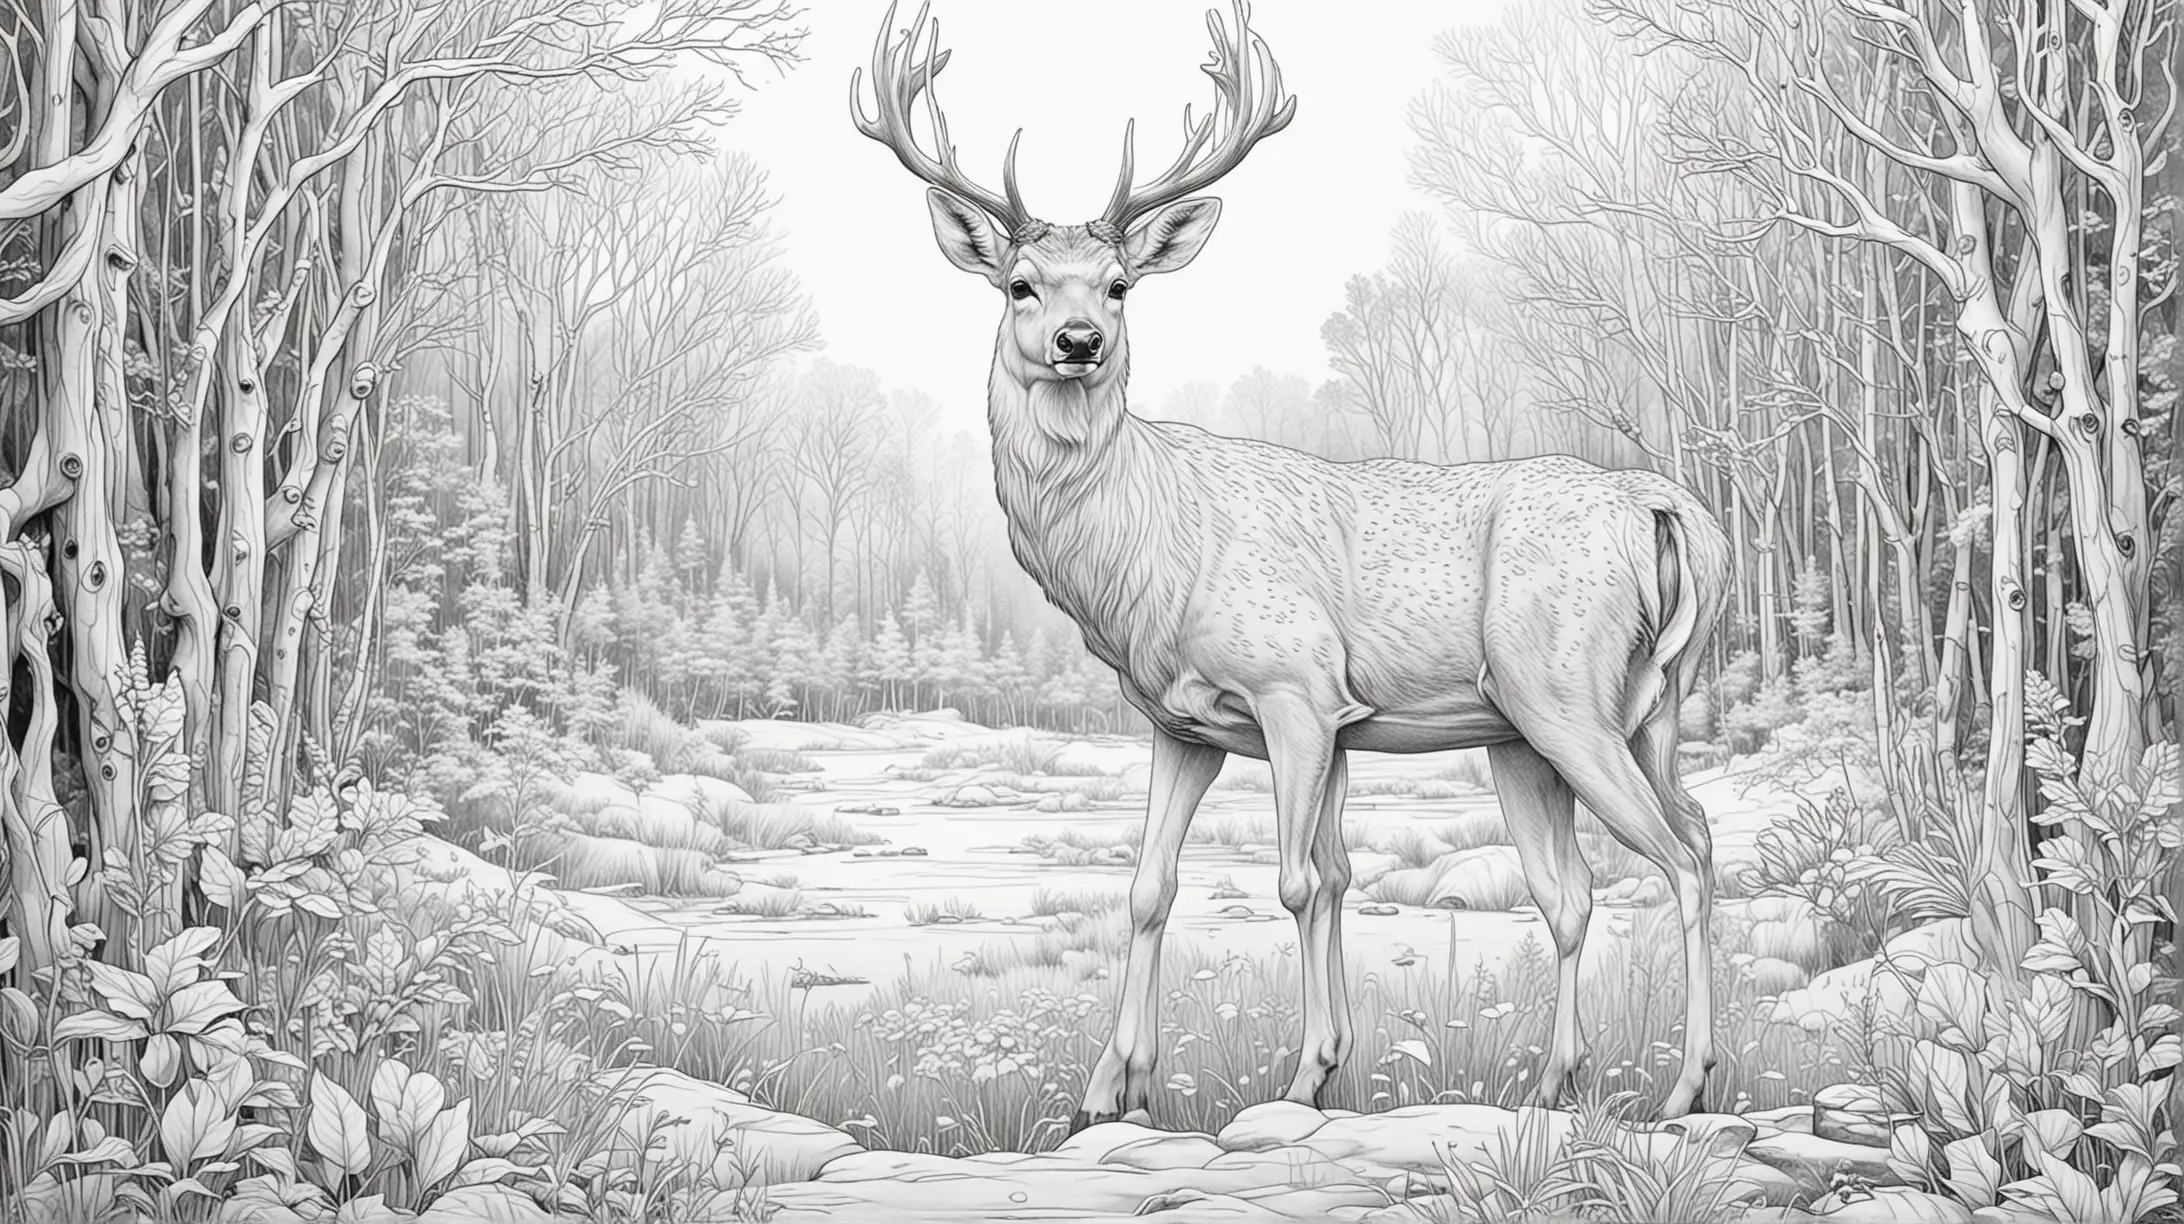 Peaceful White Deer Coloring Page for Relaxation and Creativity